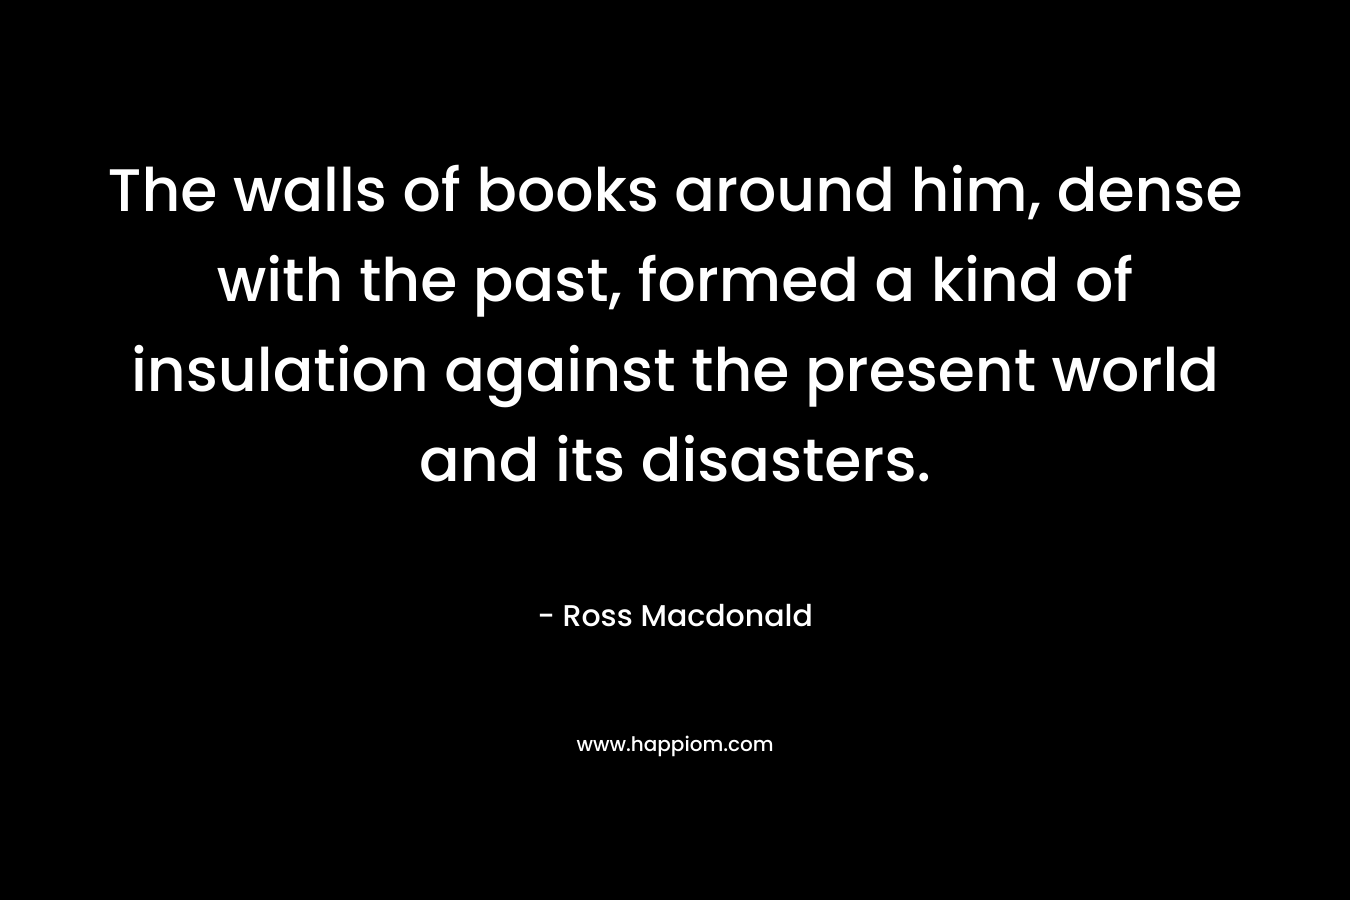 The walls of books around him, dense with the past, formed a kind of insulation against the present world and its disasters.